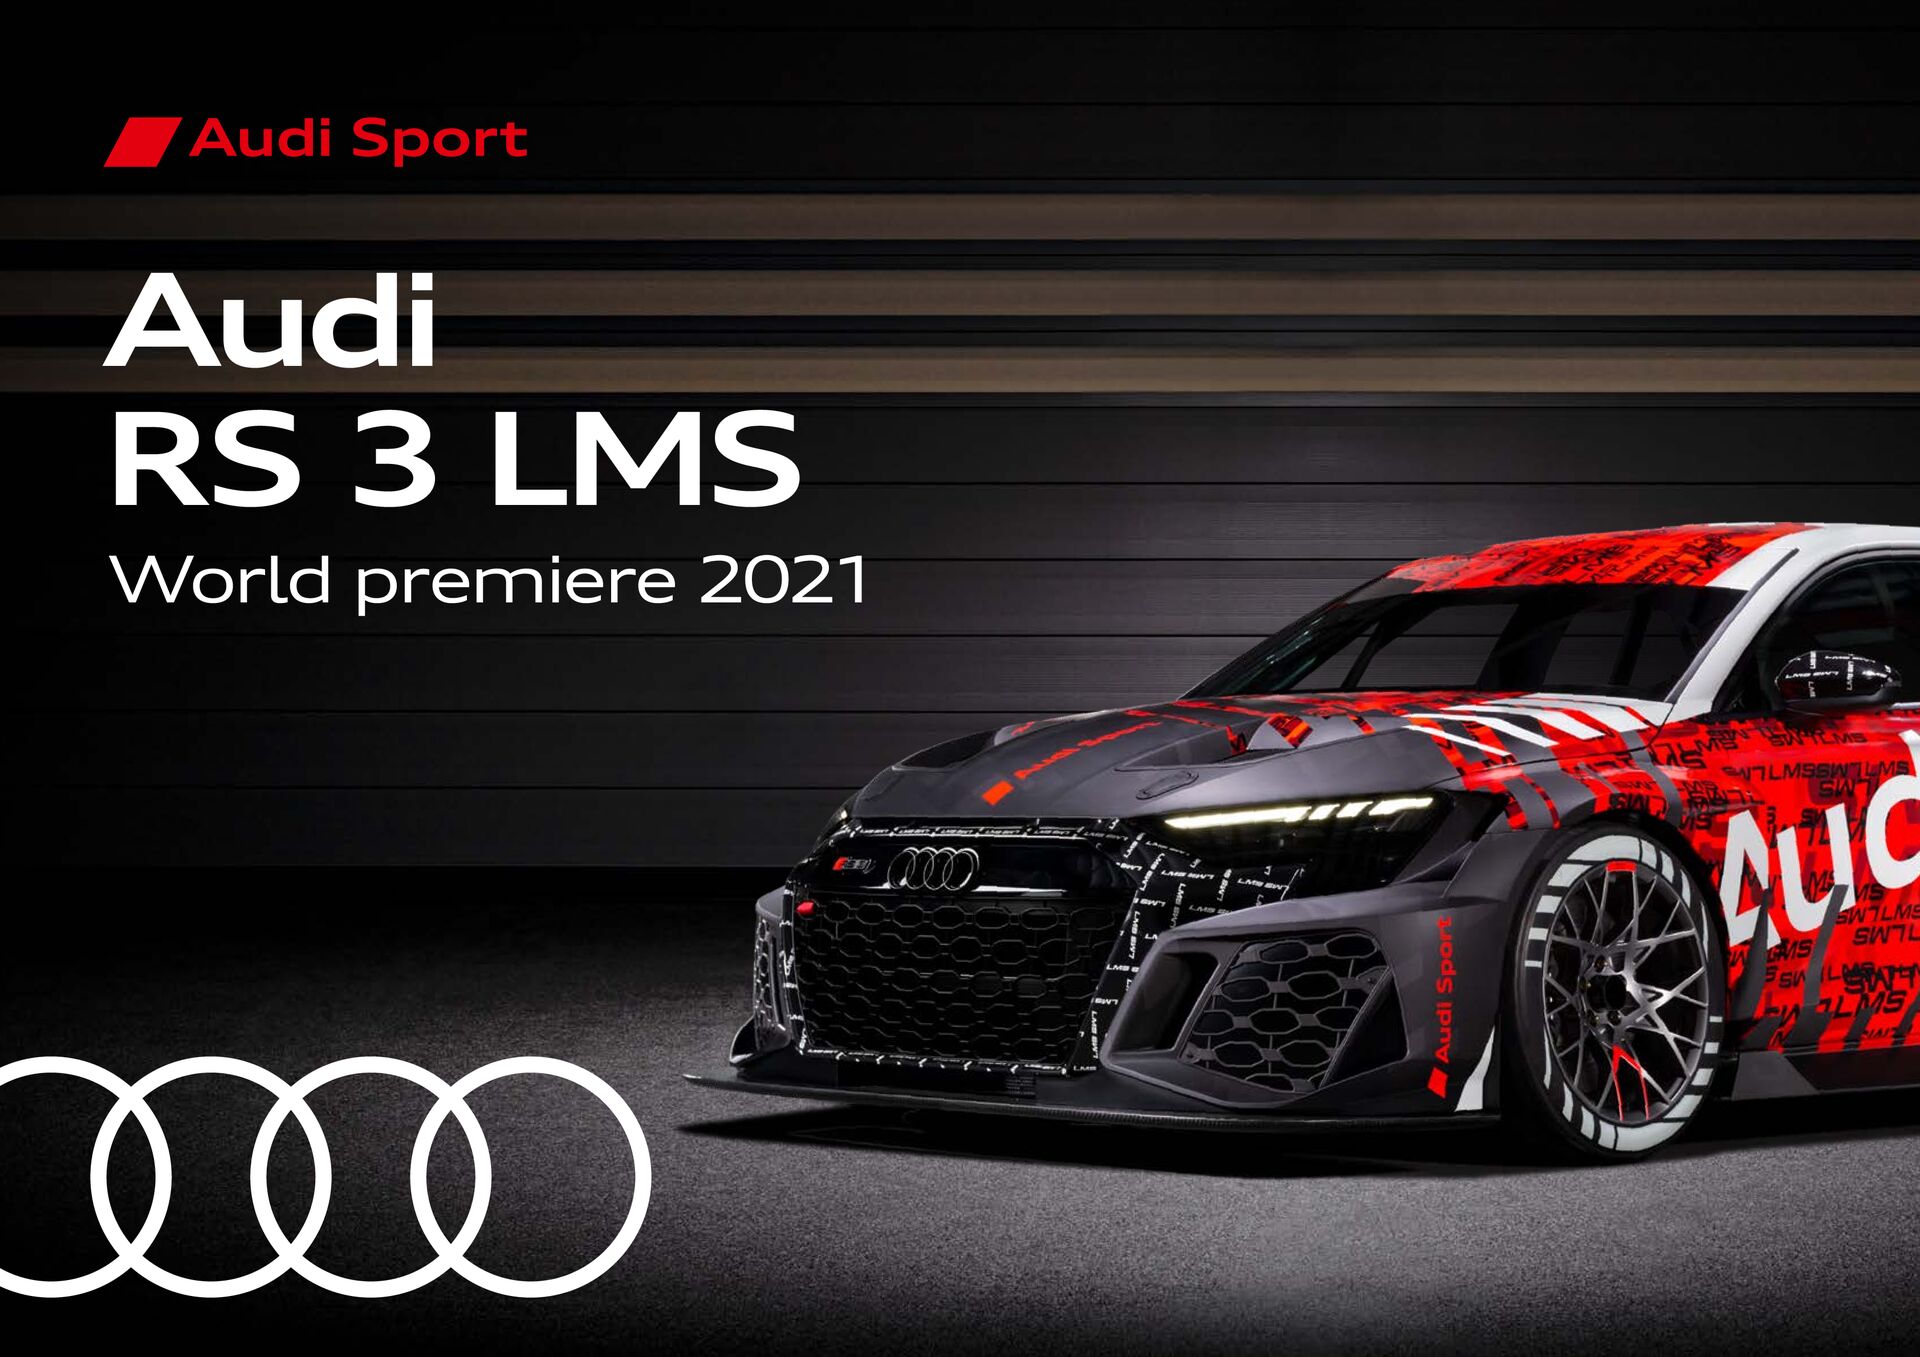 Audi RS 3 LMS at a glance